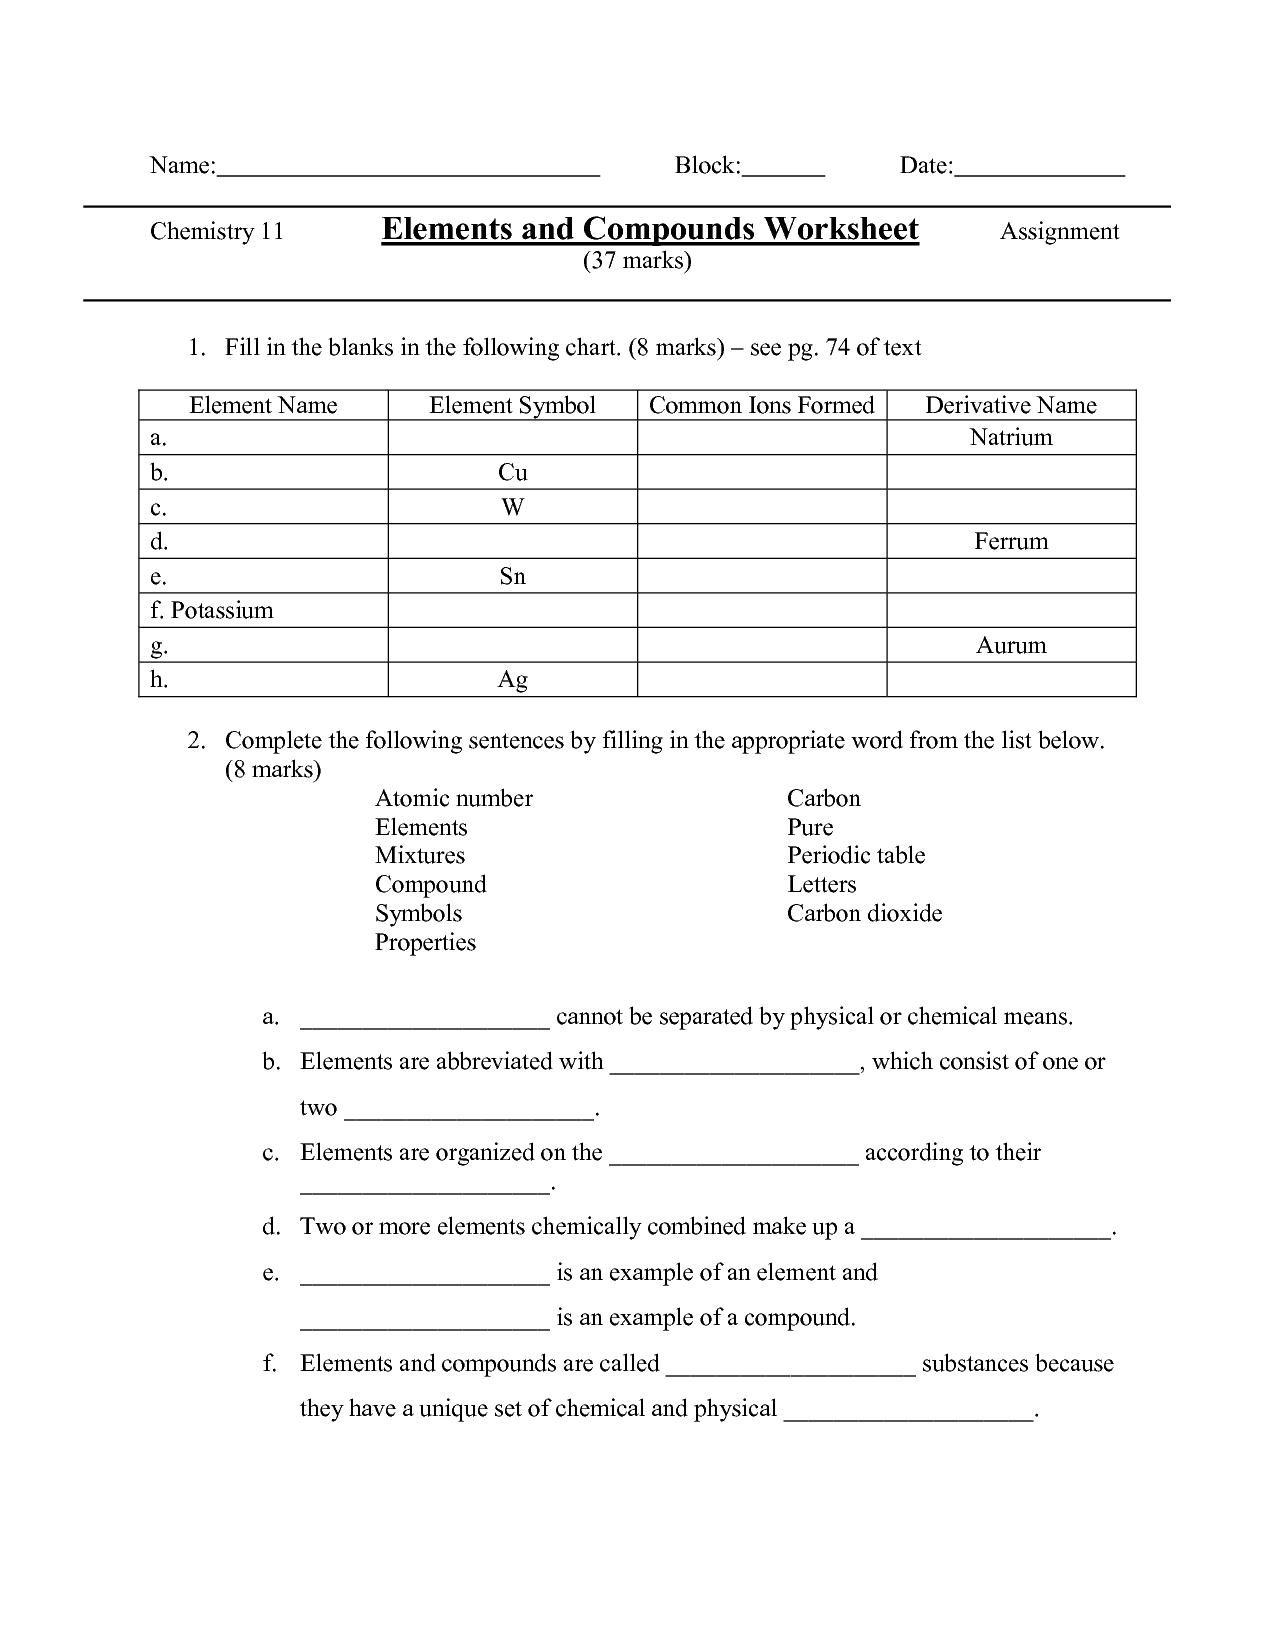 Elements Compounds and Mixtures Worksheet Answers Image